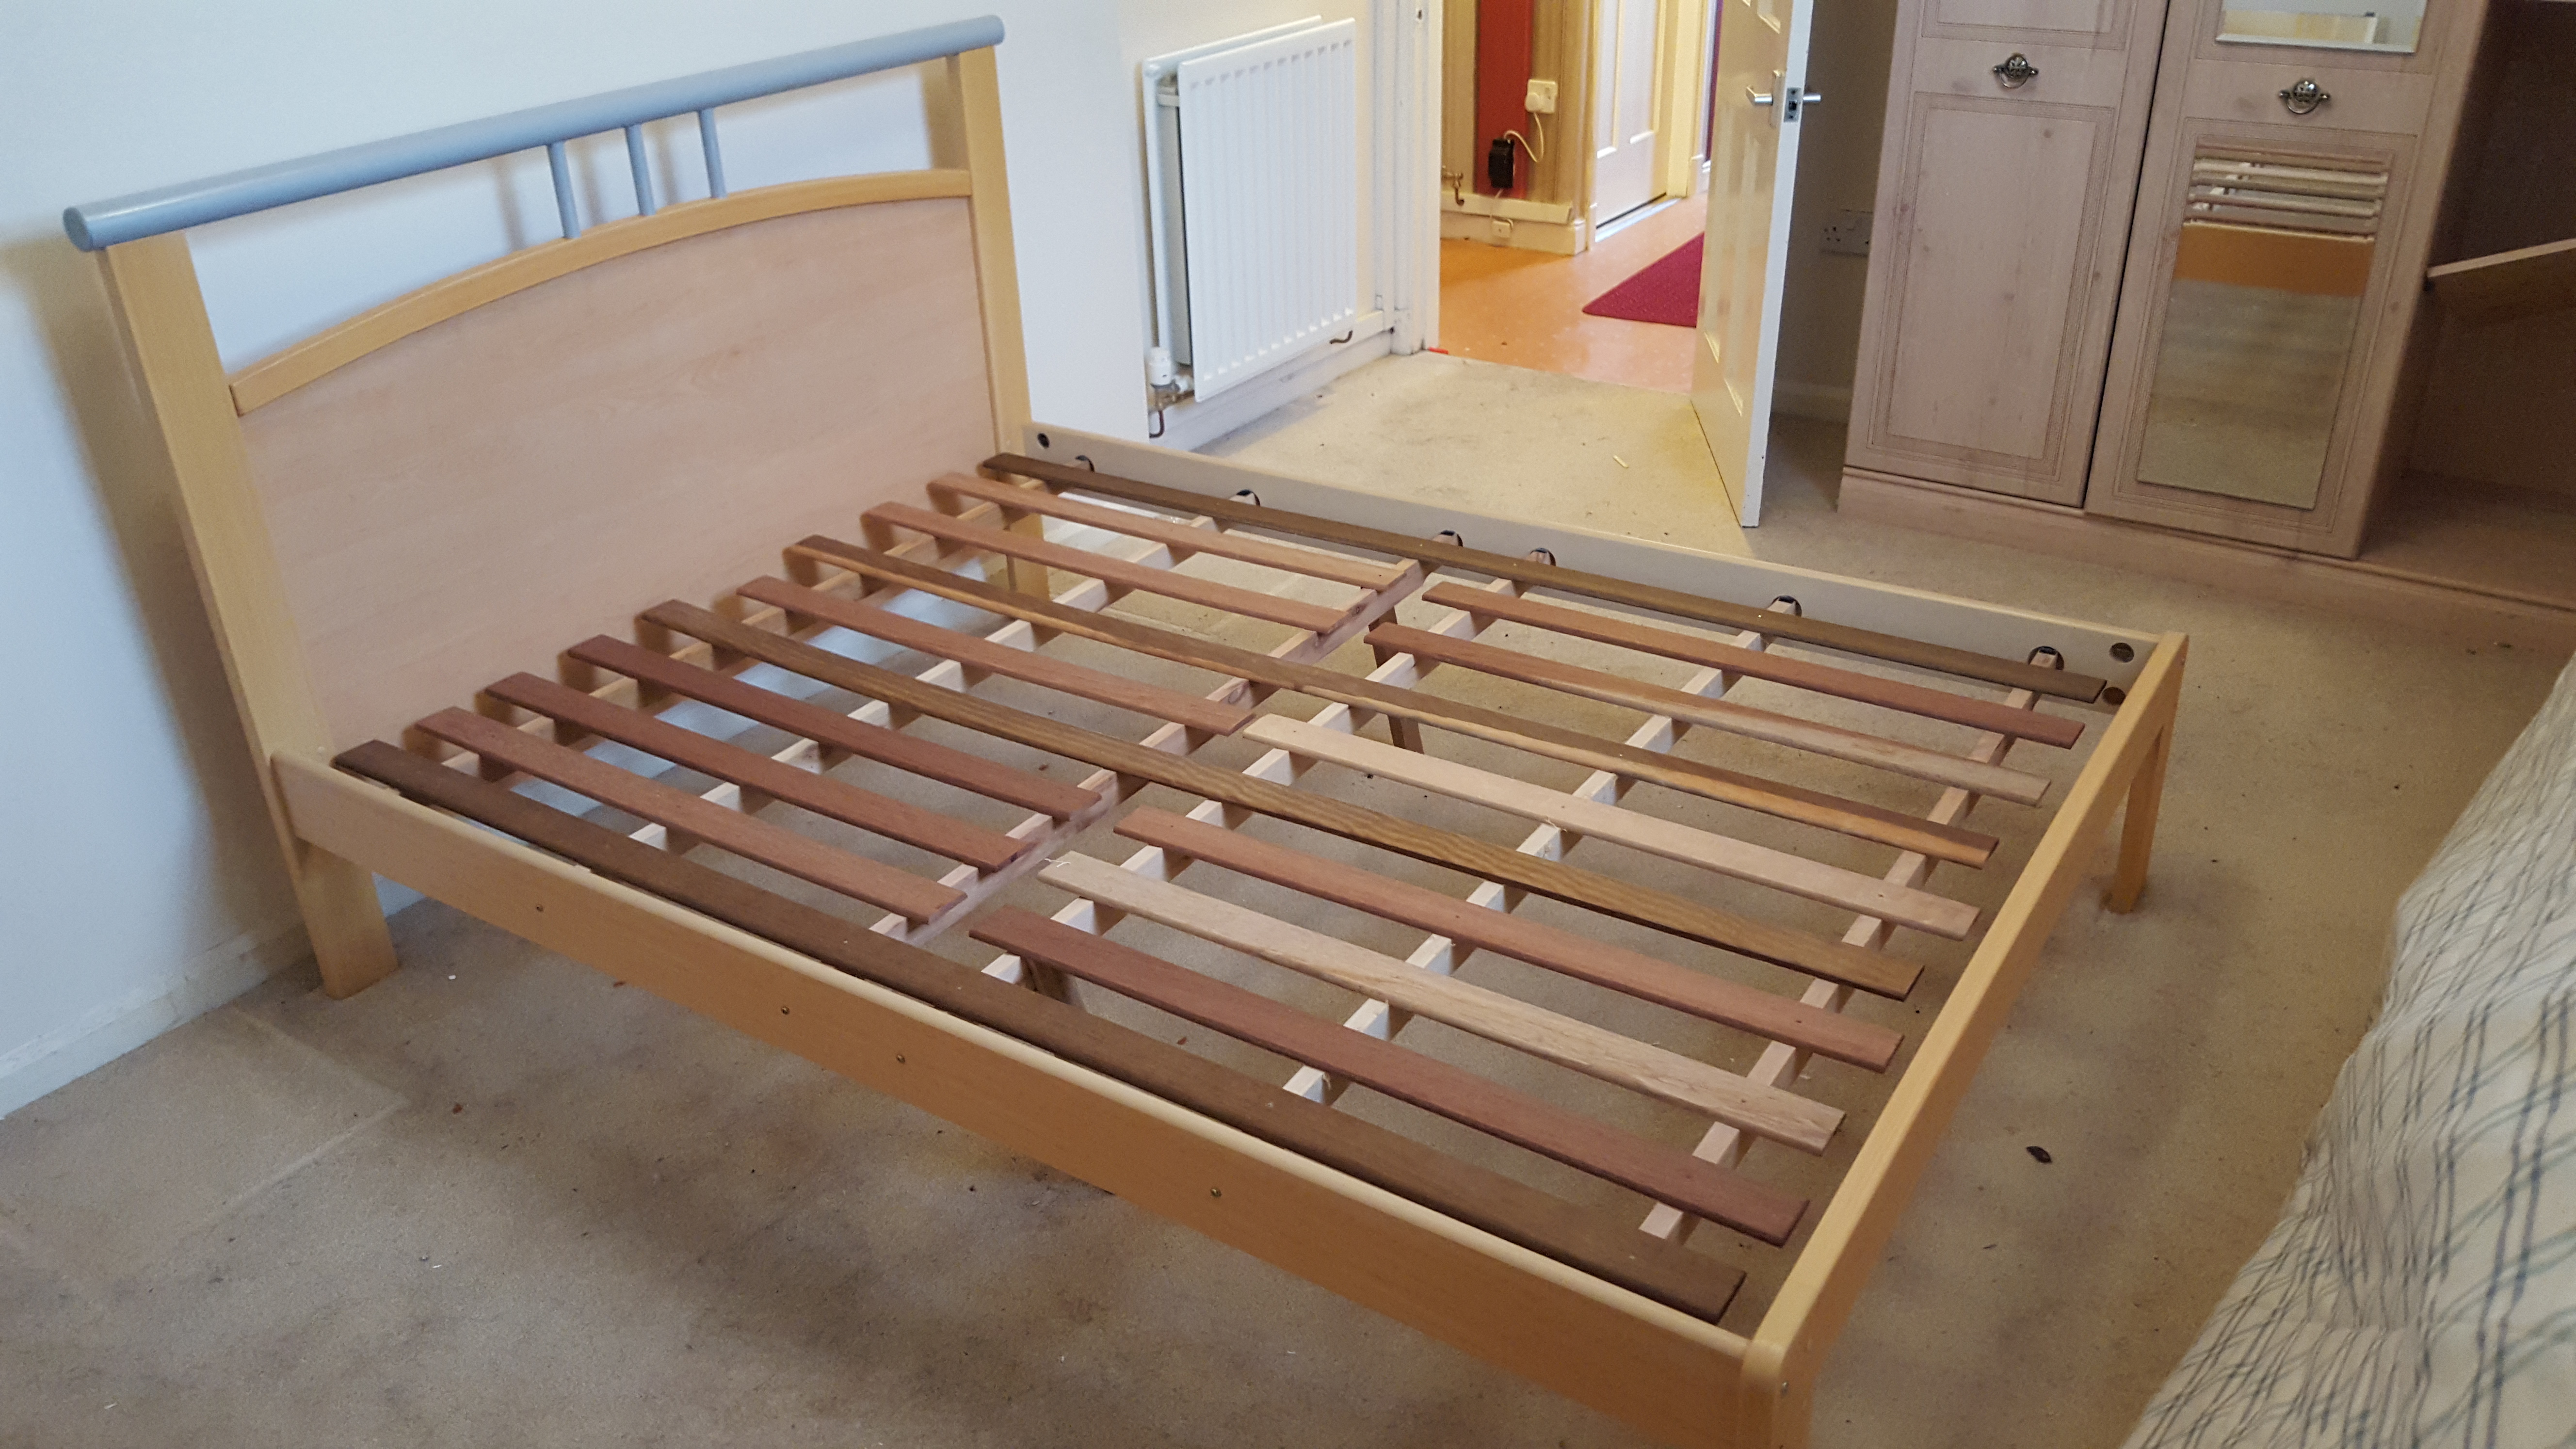 An Ikea double bed frame. - Image 2 of 3